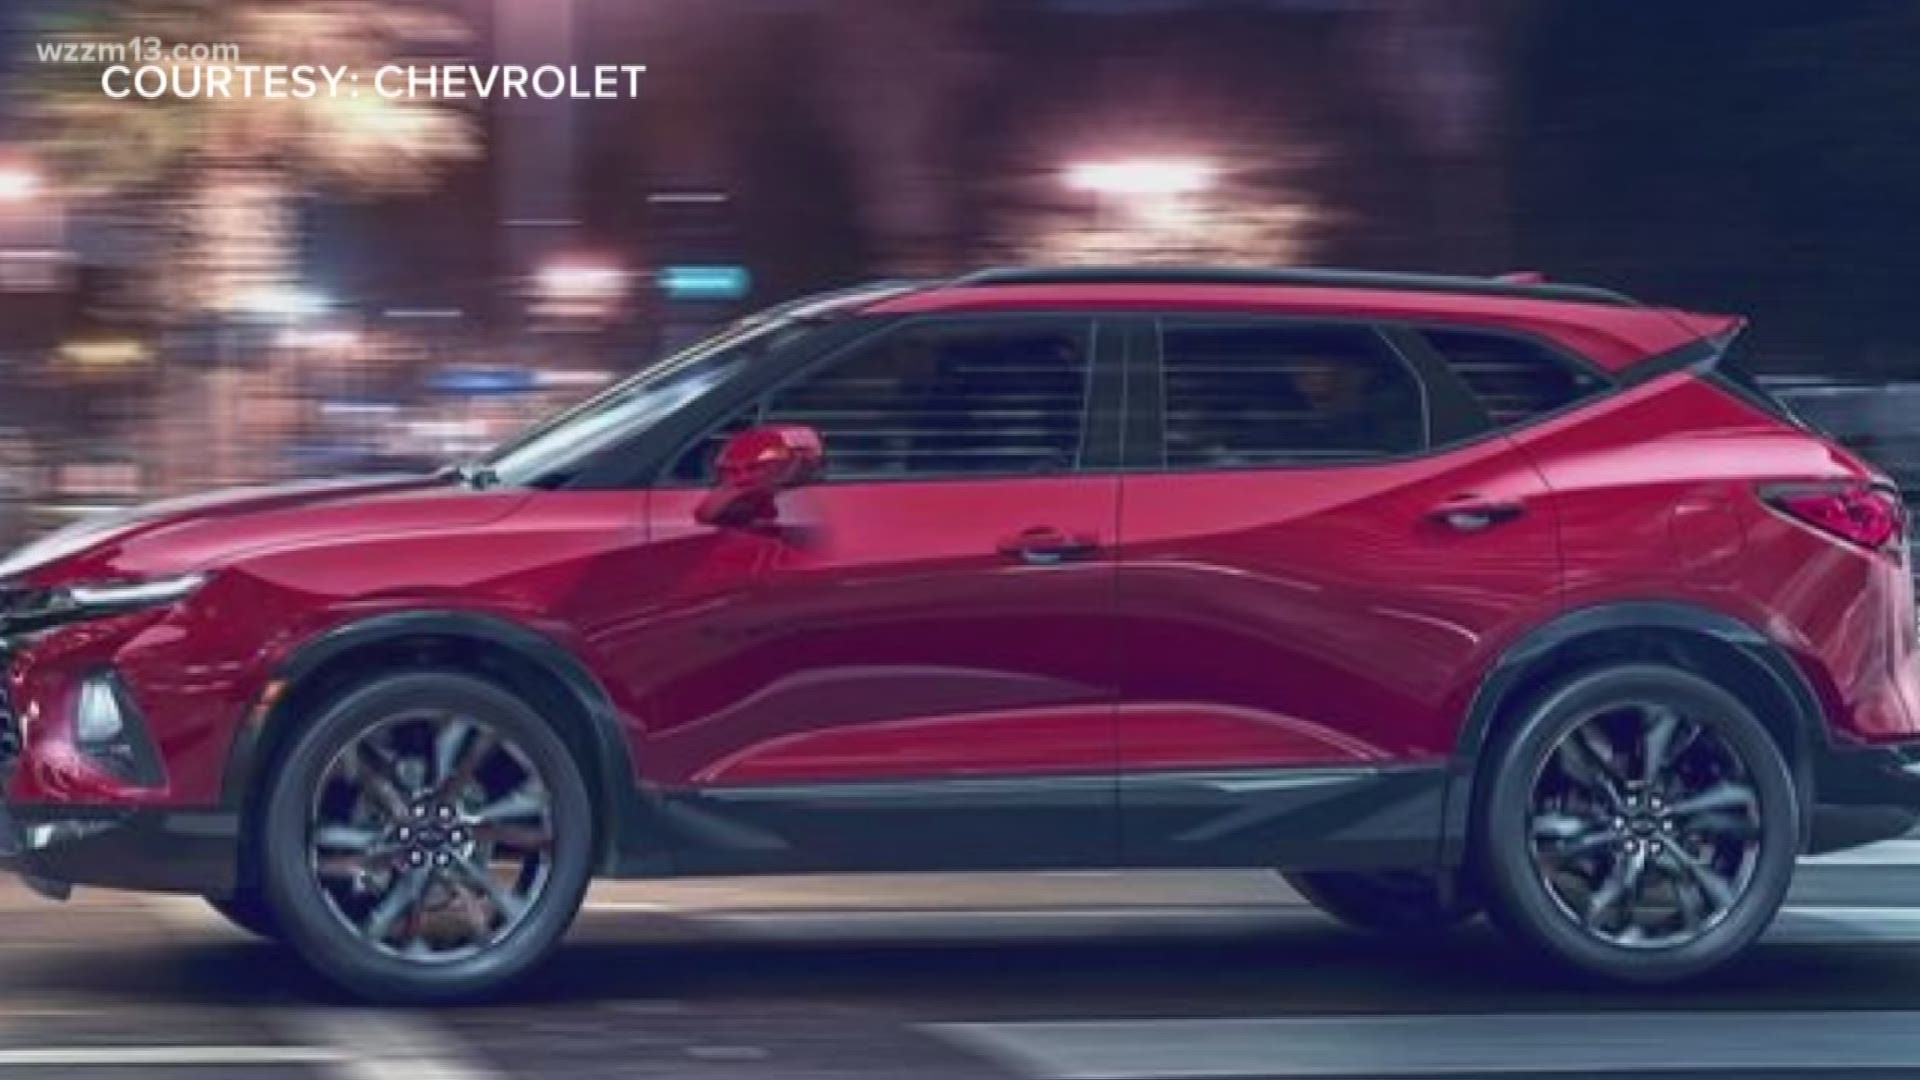 Chevy adds mid sized SUV to 2019 lineup